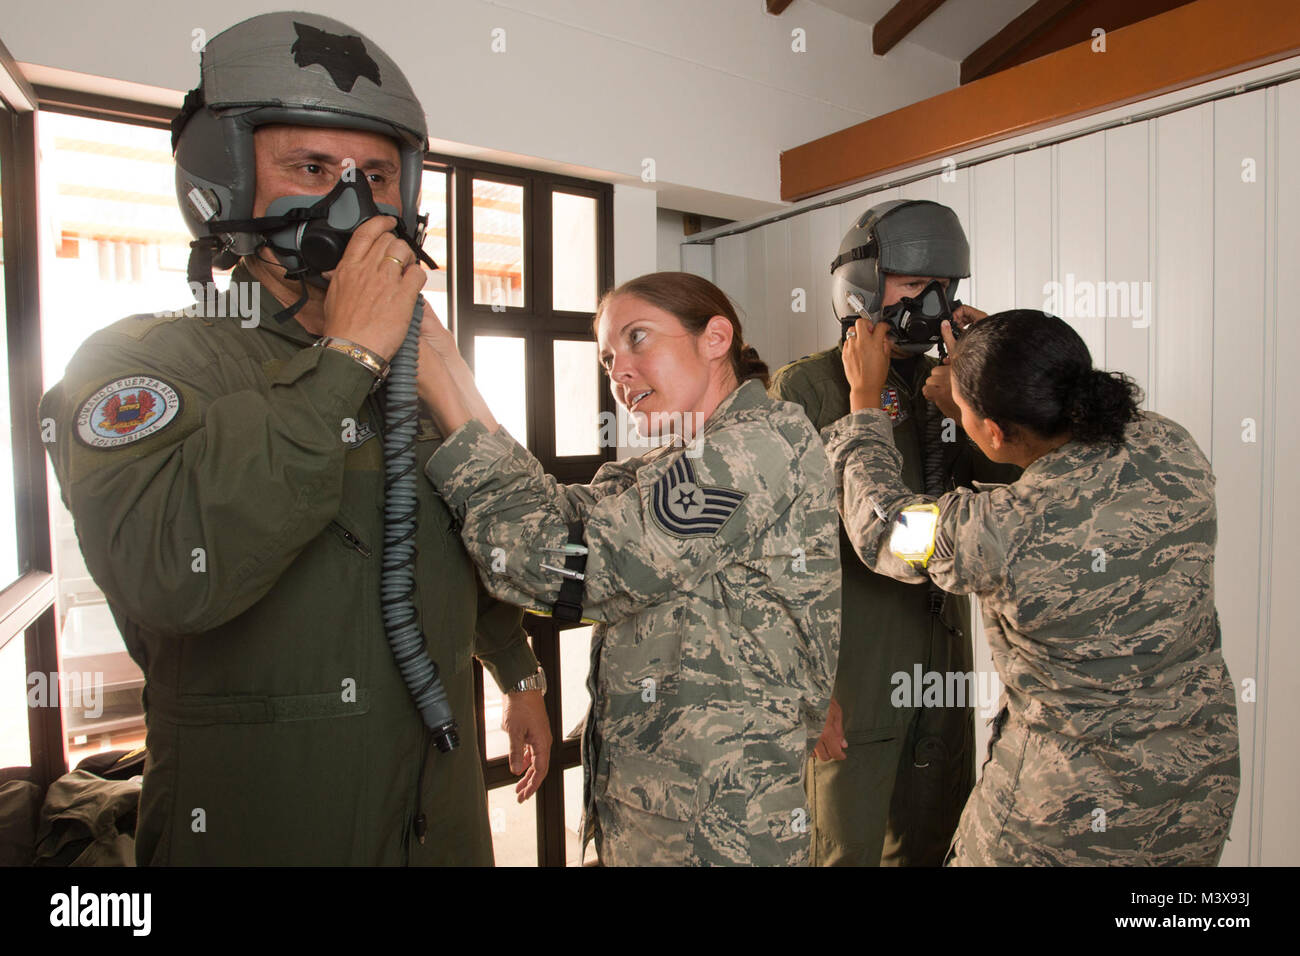 Colombian Air Force Brig. Gen. Carlos Eduardo Bueno and Brig. Gen. Ramses Rueda Rueda (sic) are fitted with flight helmets by U.S. Air Force Tech. Sgt. Hannah Conner and Tech. Sgt. Benita Johnson, both assigned to the 169th Operations Support Squadron's Aircrew Flight Equipment section from McEntire Joint National Guard Base of the South Carolina Air National Guard, Aug. 11, 2014. The fitting is part of the preflight requirements to fly in a SCANG F-16 during Relampago (Lightning) 2014, at Rionegro, Colombia. Relampago is a combined air cooperation engagement with the Republic of Colombia. One Stock Photo